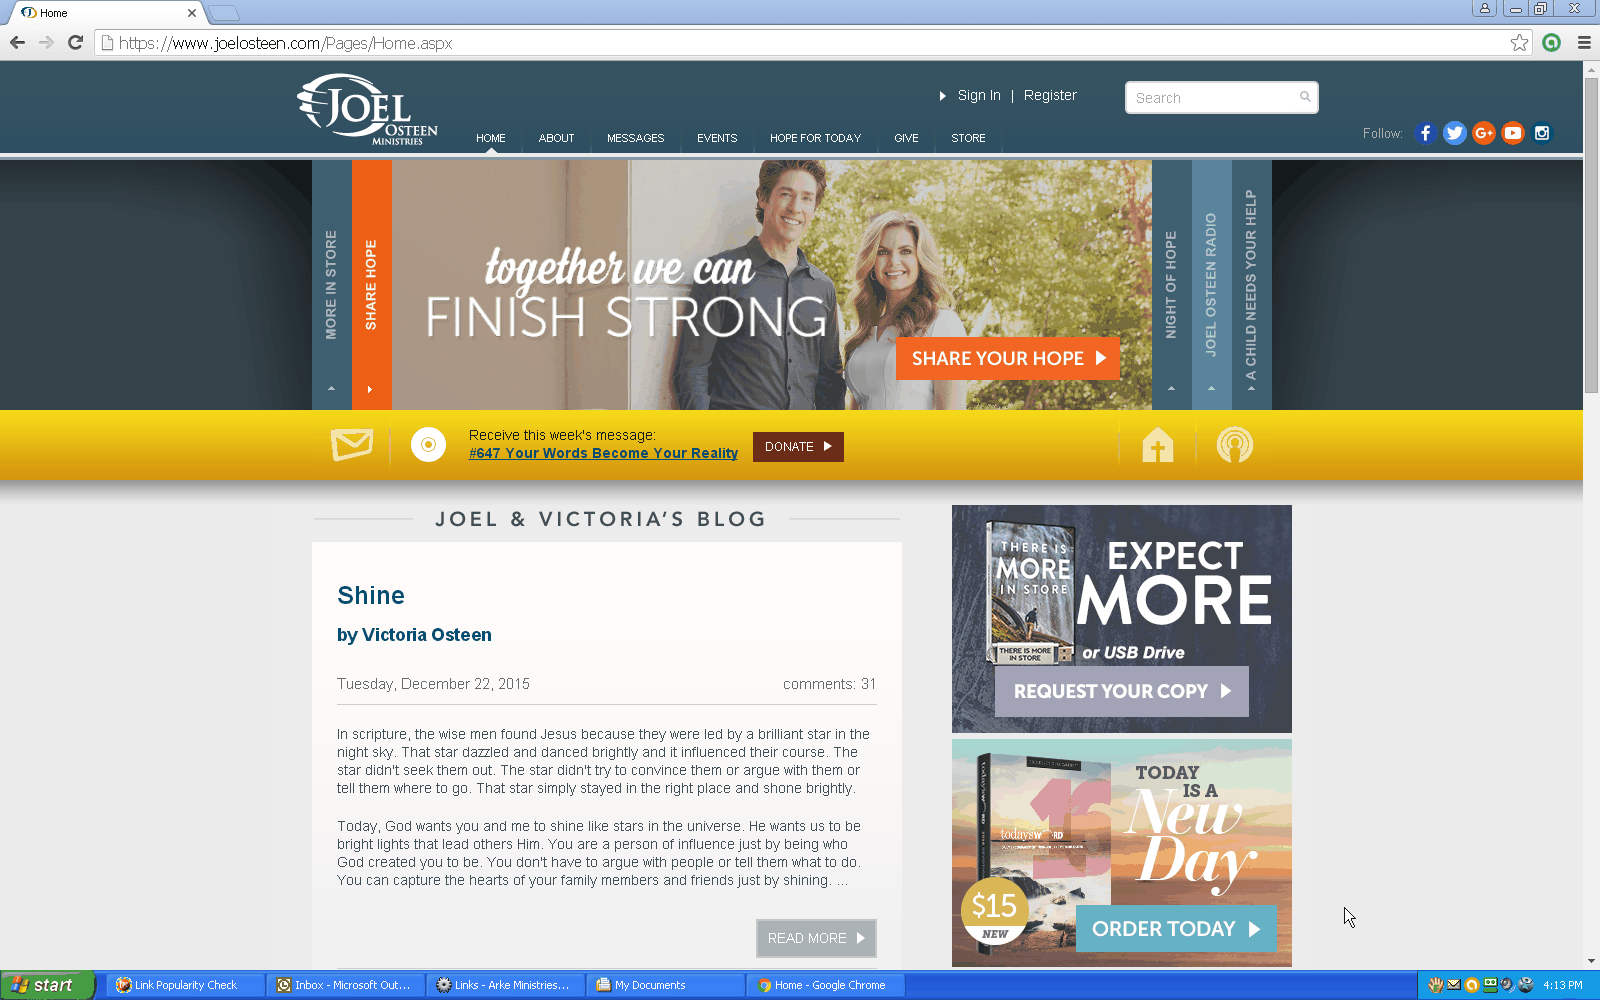 http://www.joelosteen.com/Pages/Home.aspx